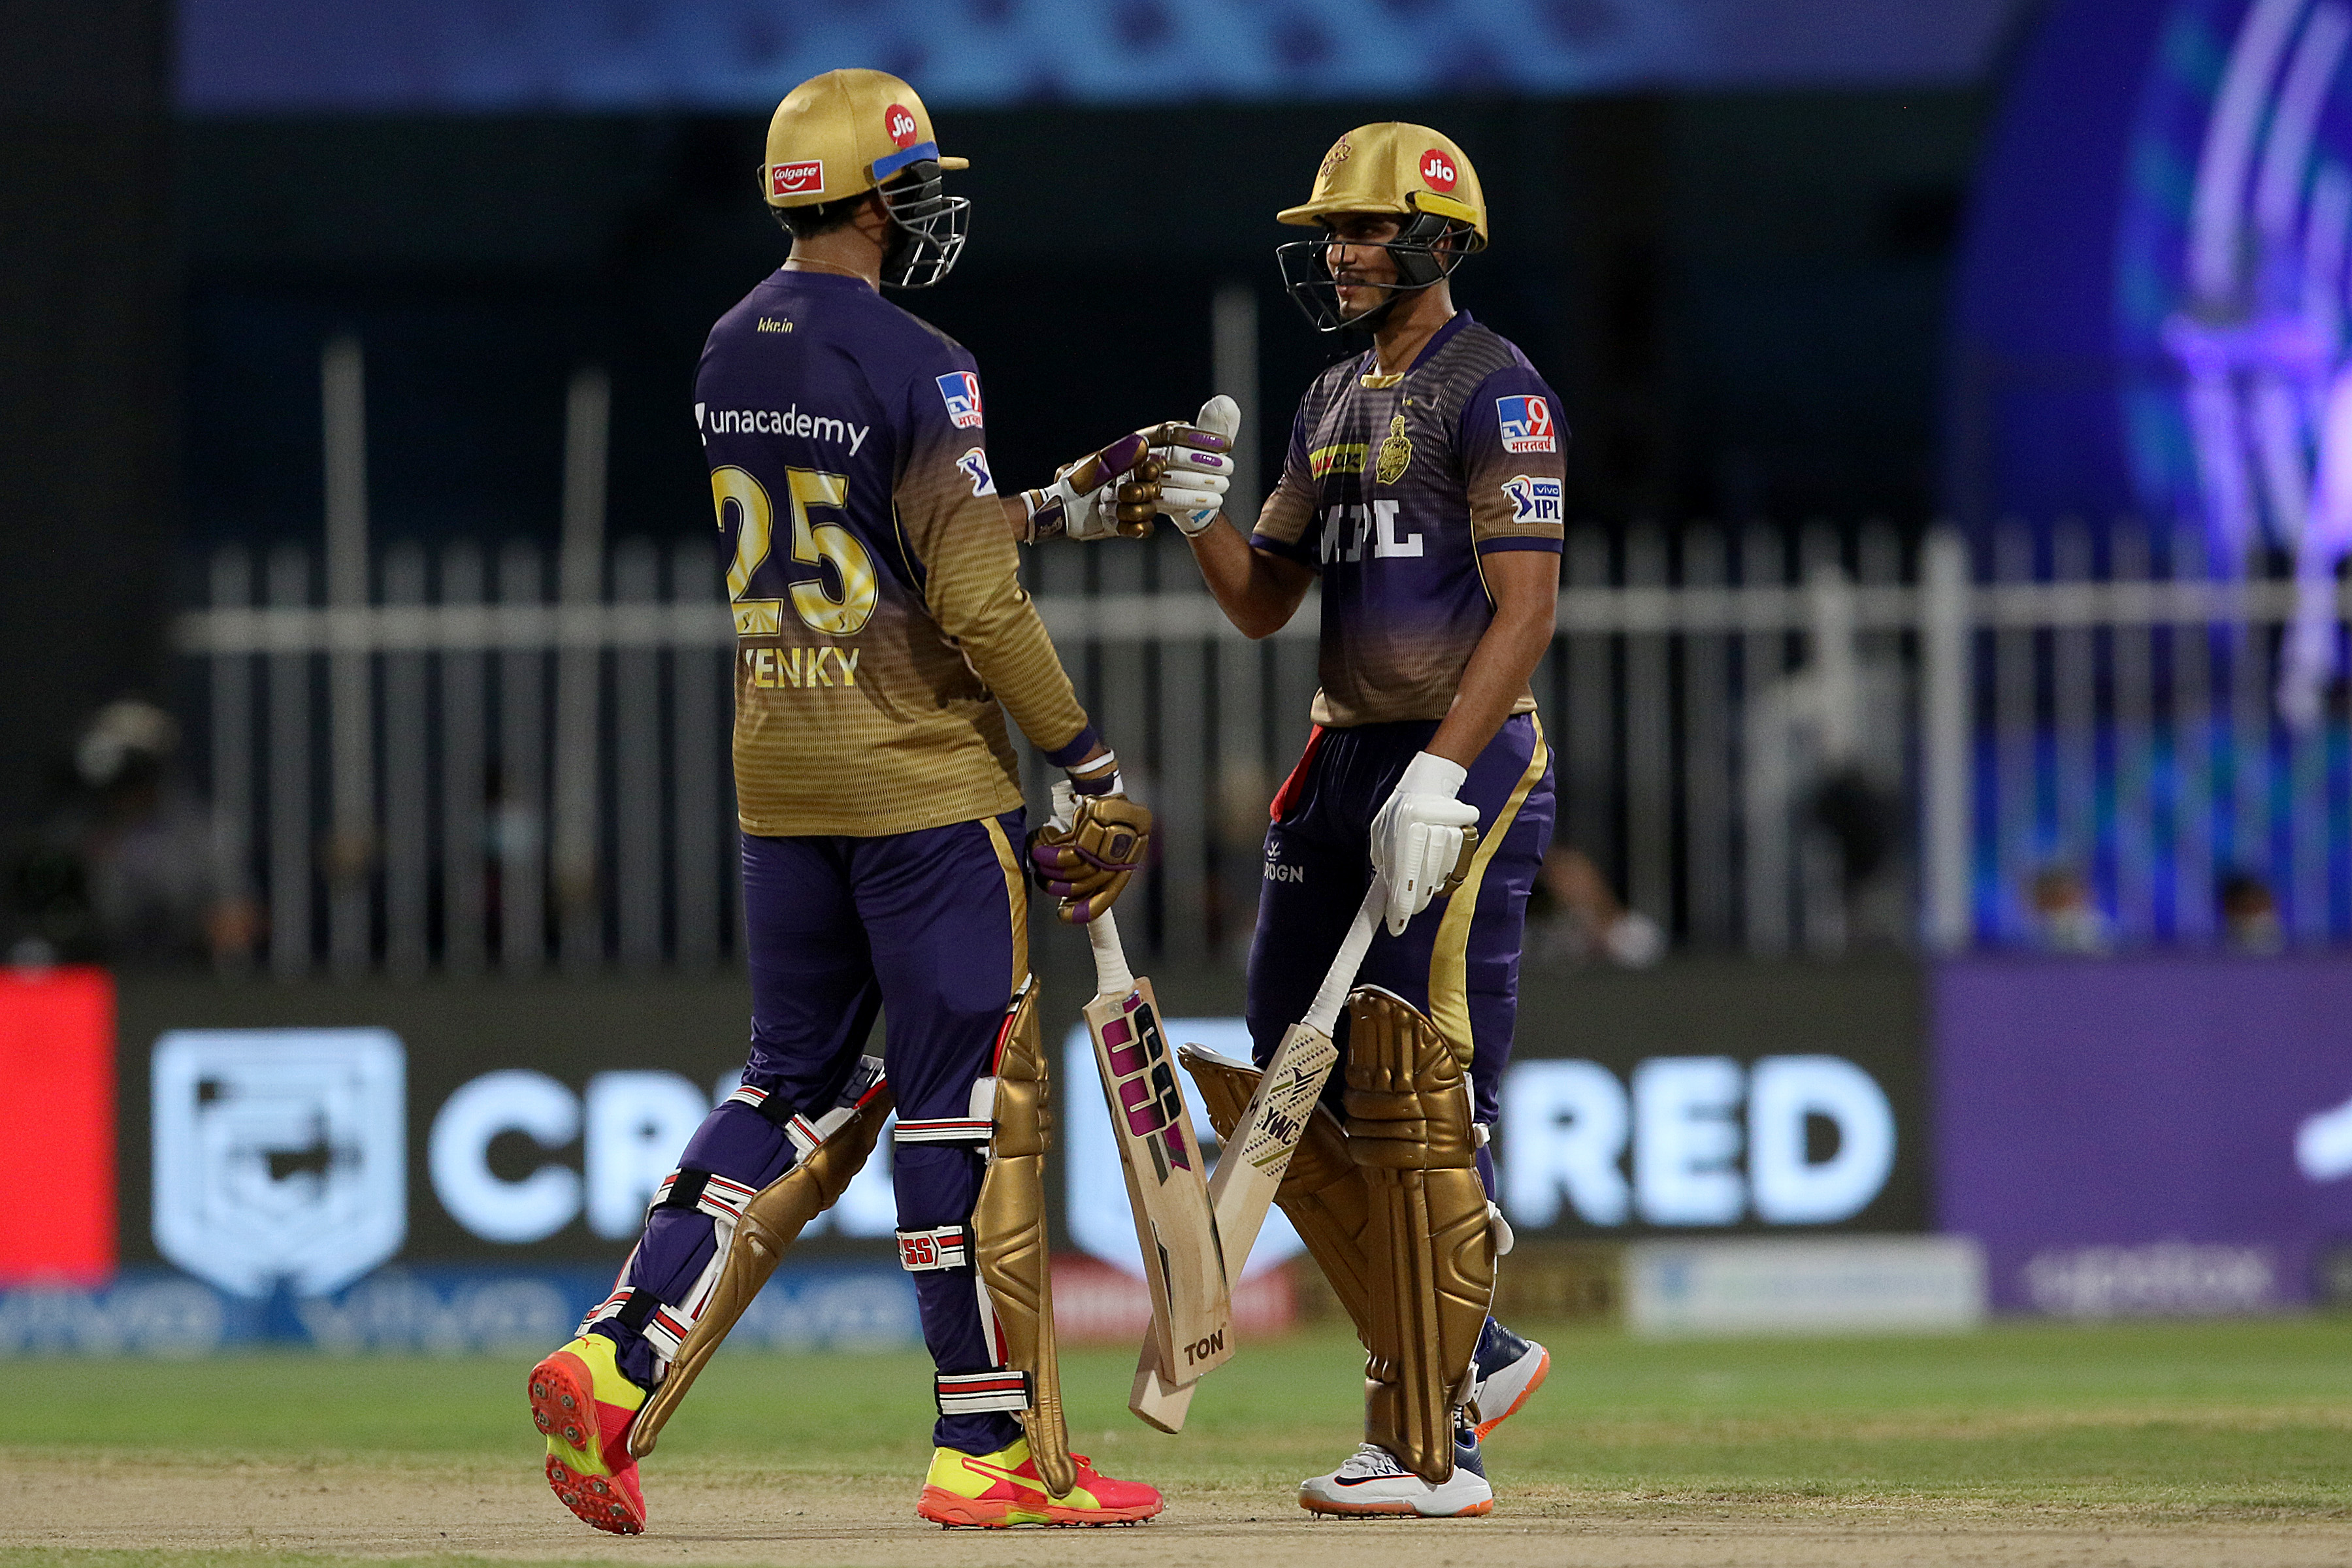 KKR vs RR | Gill and Iyer have been our shining lights, says Eoin Morgan as KKR inch closer to playoffs